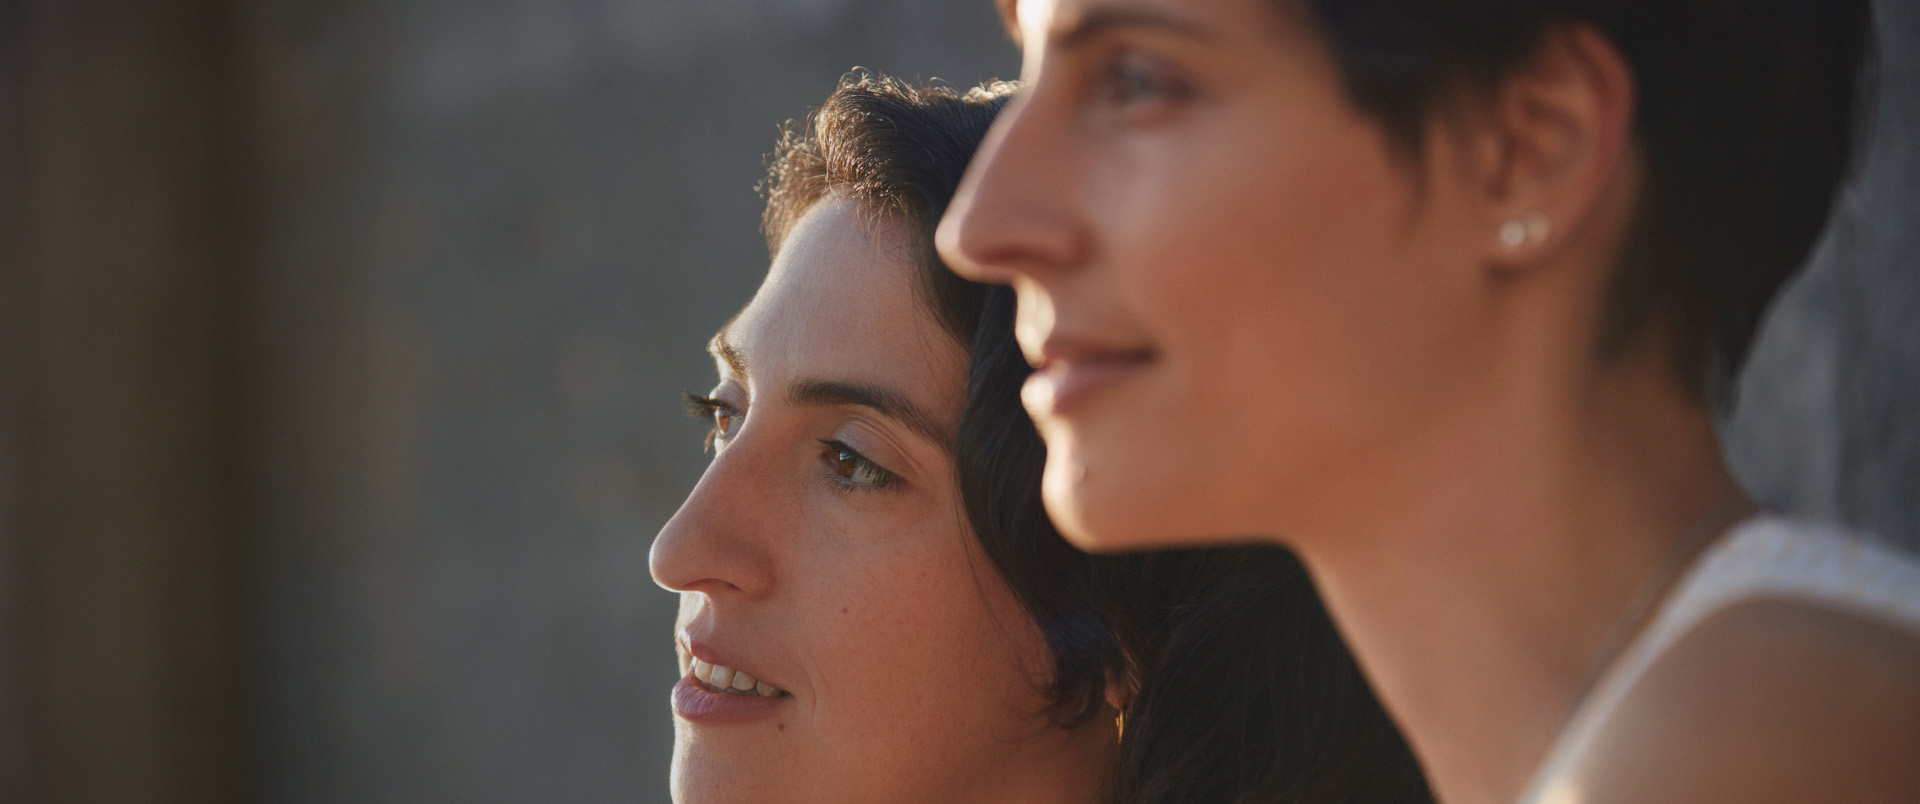 Two women smiling looking into distance together